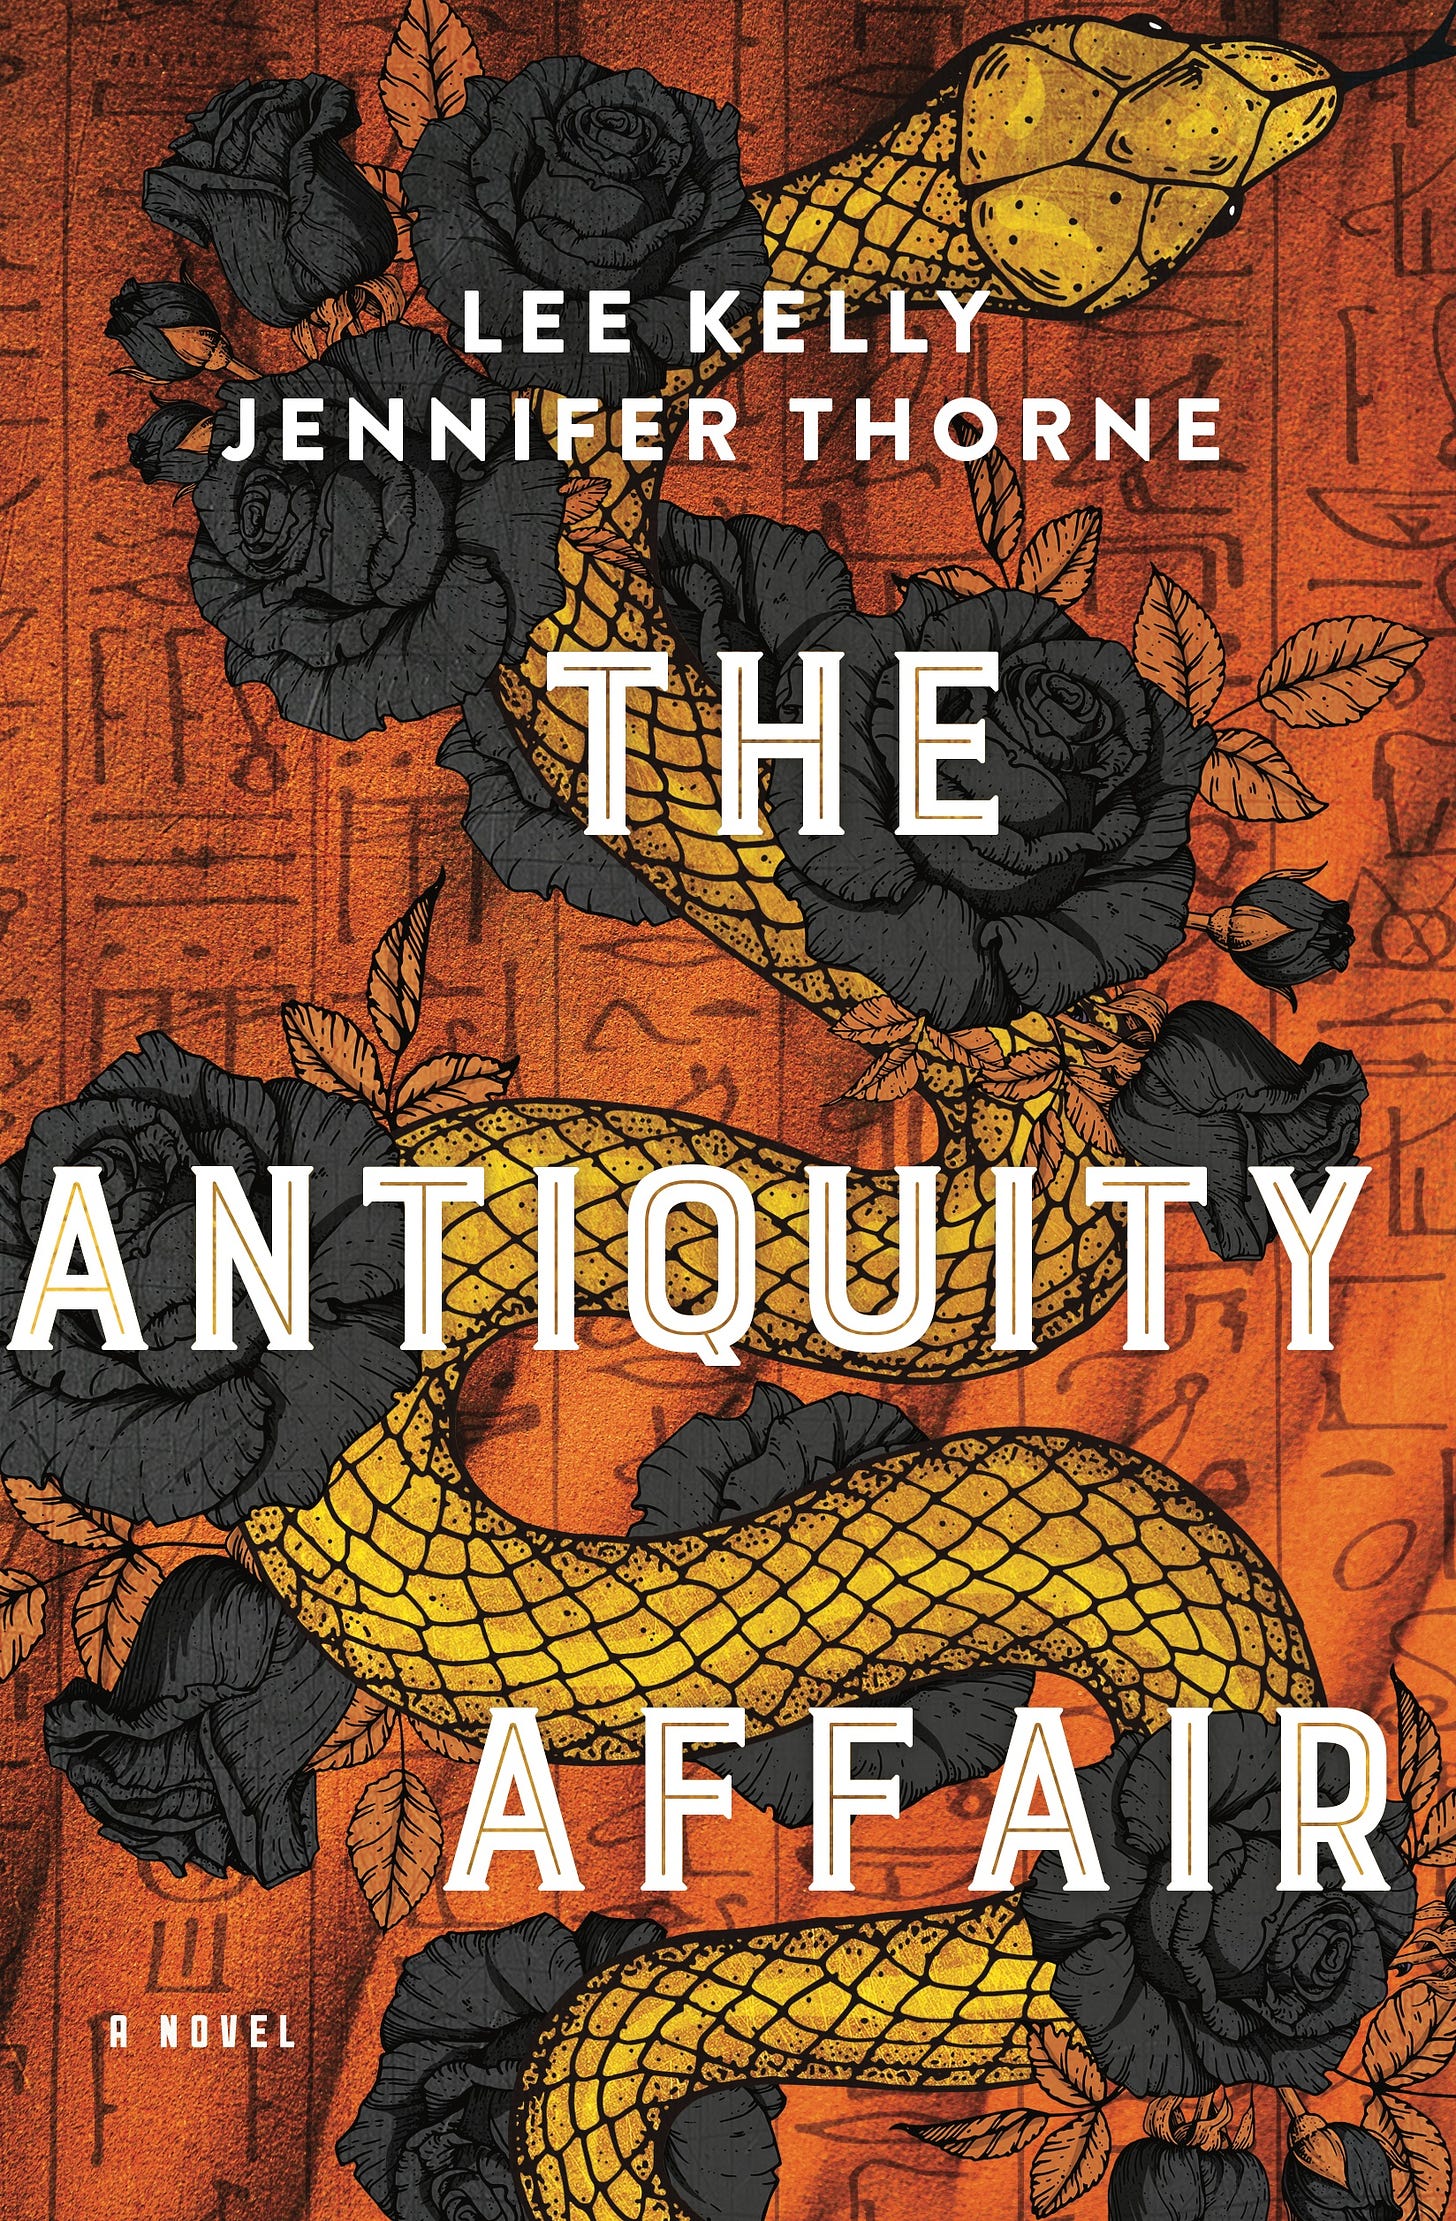 The book cover for The Antiquity Affair featuring a gold snake and black roses against an orange background with strange text across it. The title is in white in front of it all.